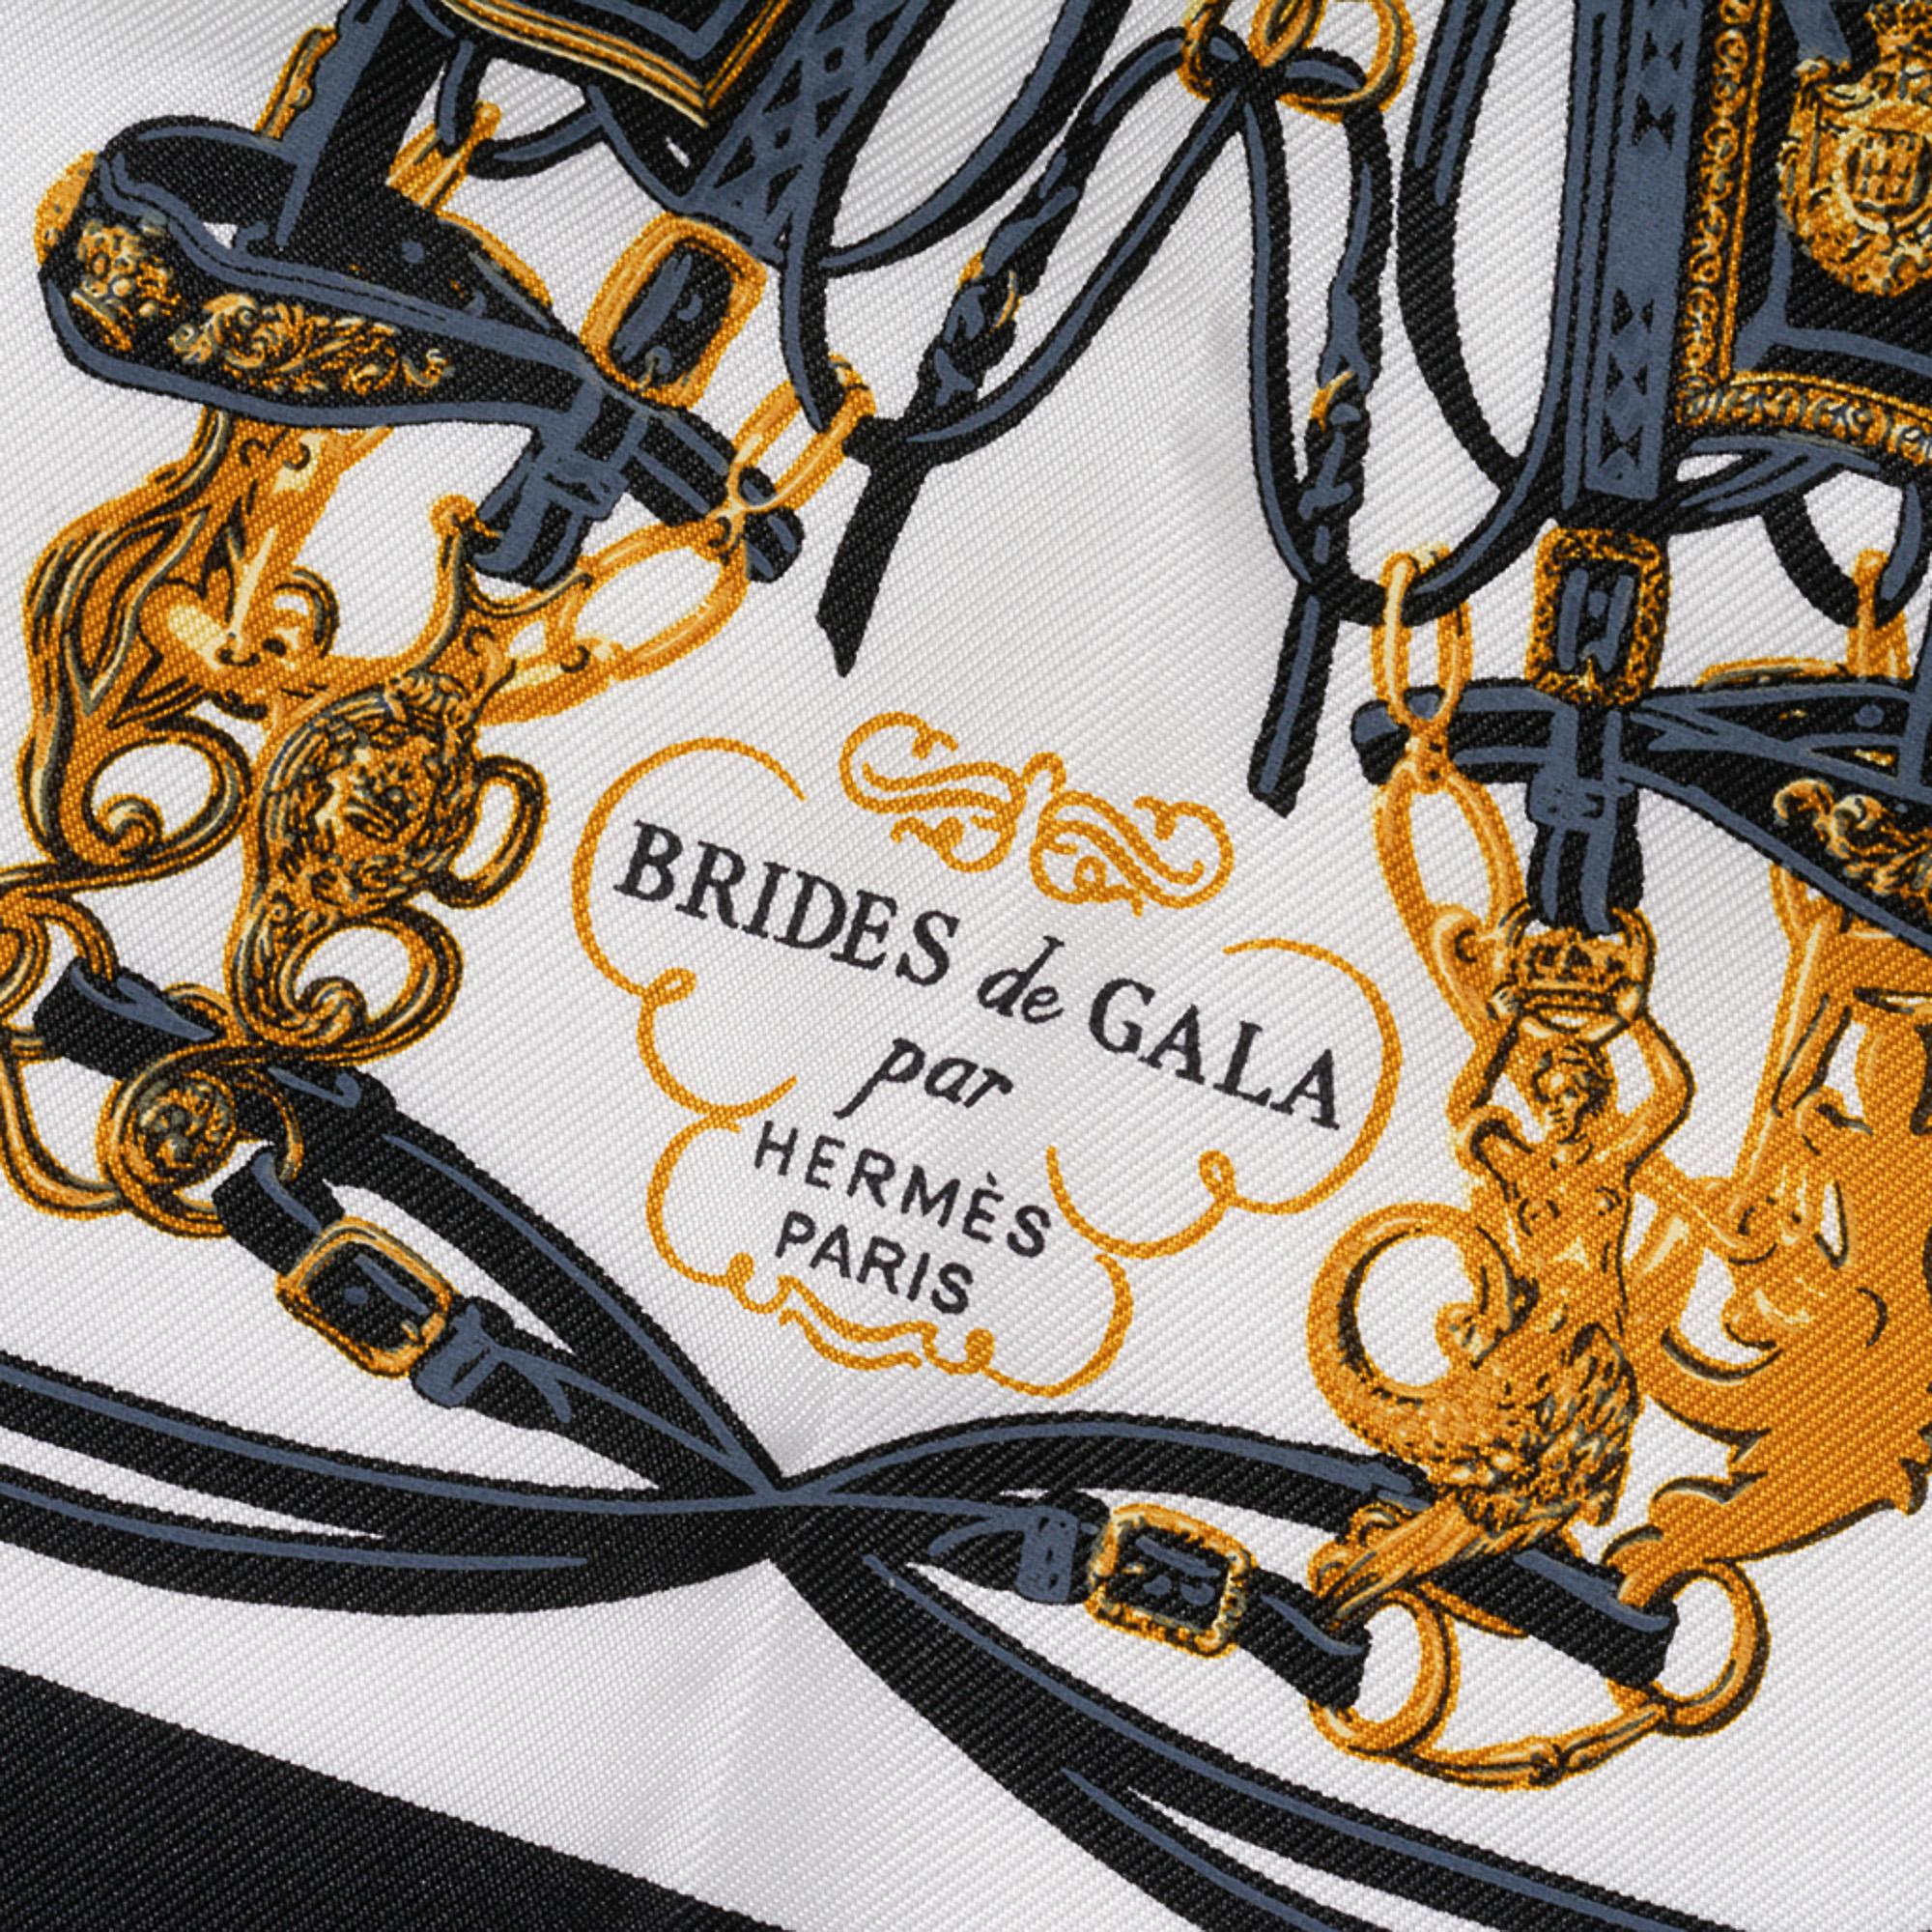 Guaranteed authentic Hermes Brides de Gala 20 cm Nano Scarf featured in Noir, Blanc, Or.
This iconic Hermes scarf can be worn in a myriad ways to add a playful touch to your wardrobe.
Tucked in a pocket, worn on the wrist or ankle, tied to the